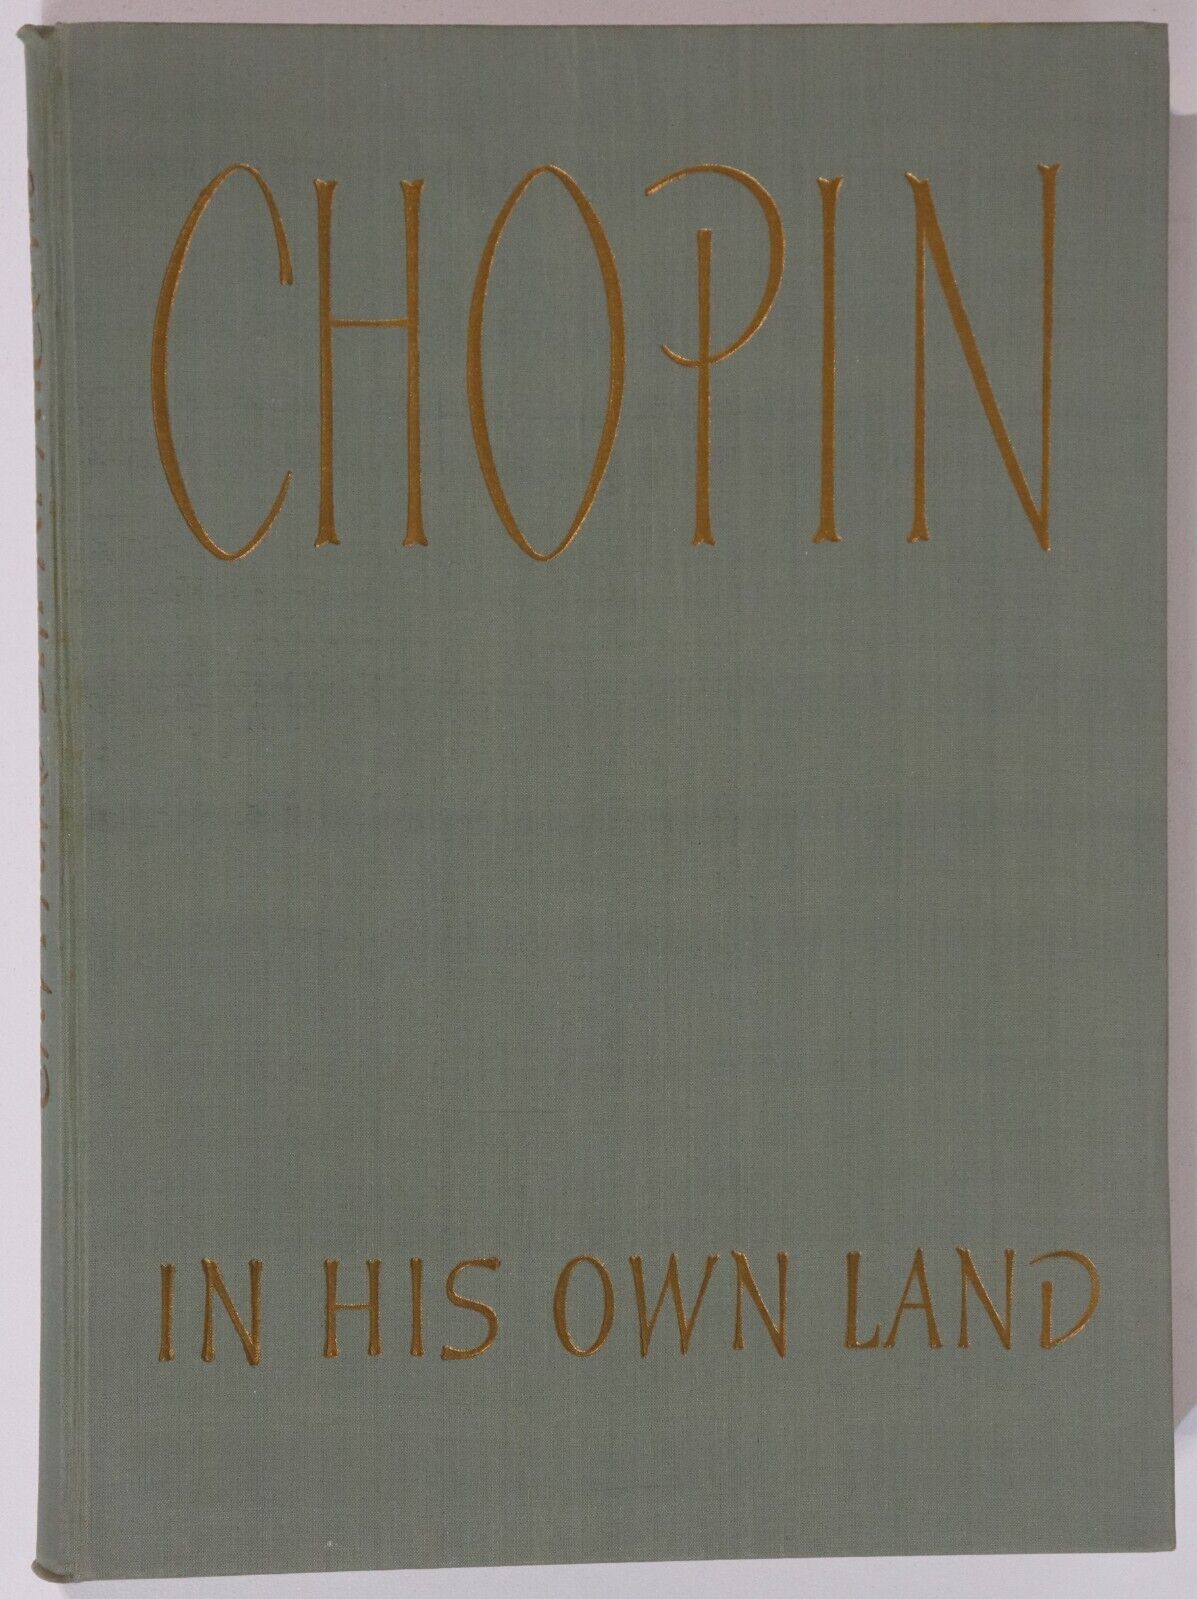 Chopin In His Own Land by K. Koblyanska - 1955 - Classical Music History Book - 0